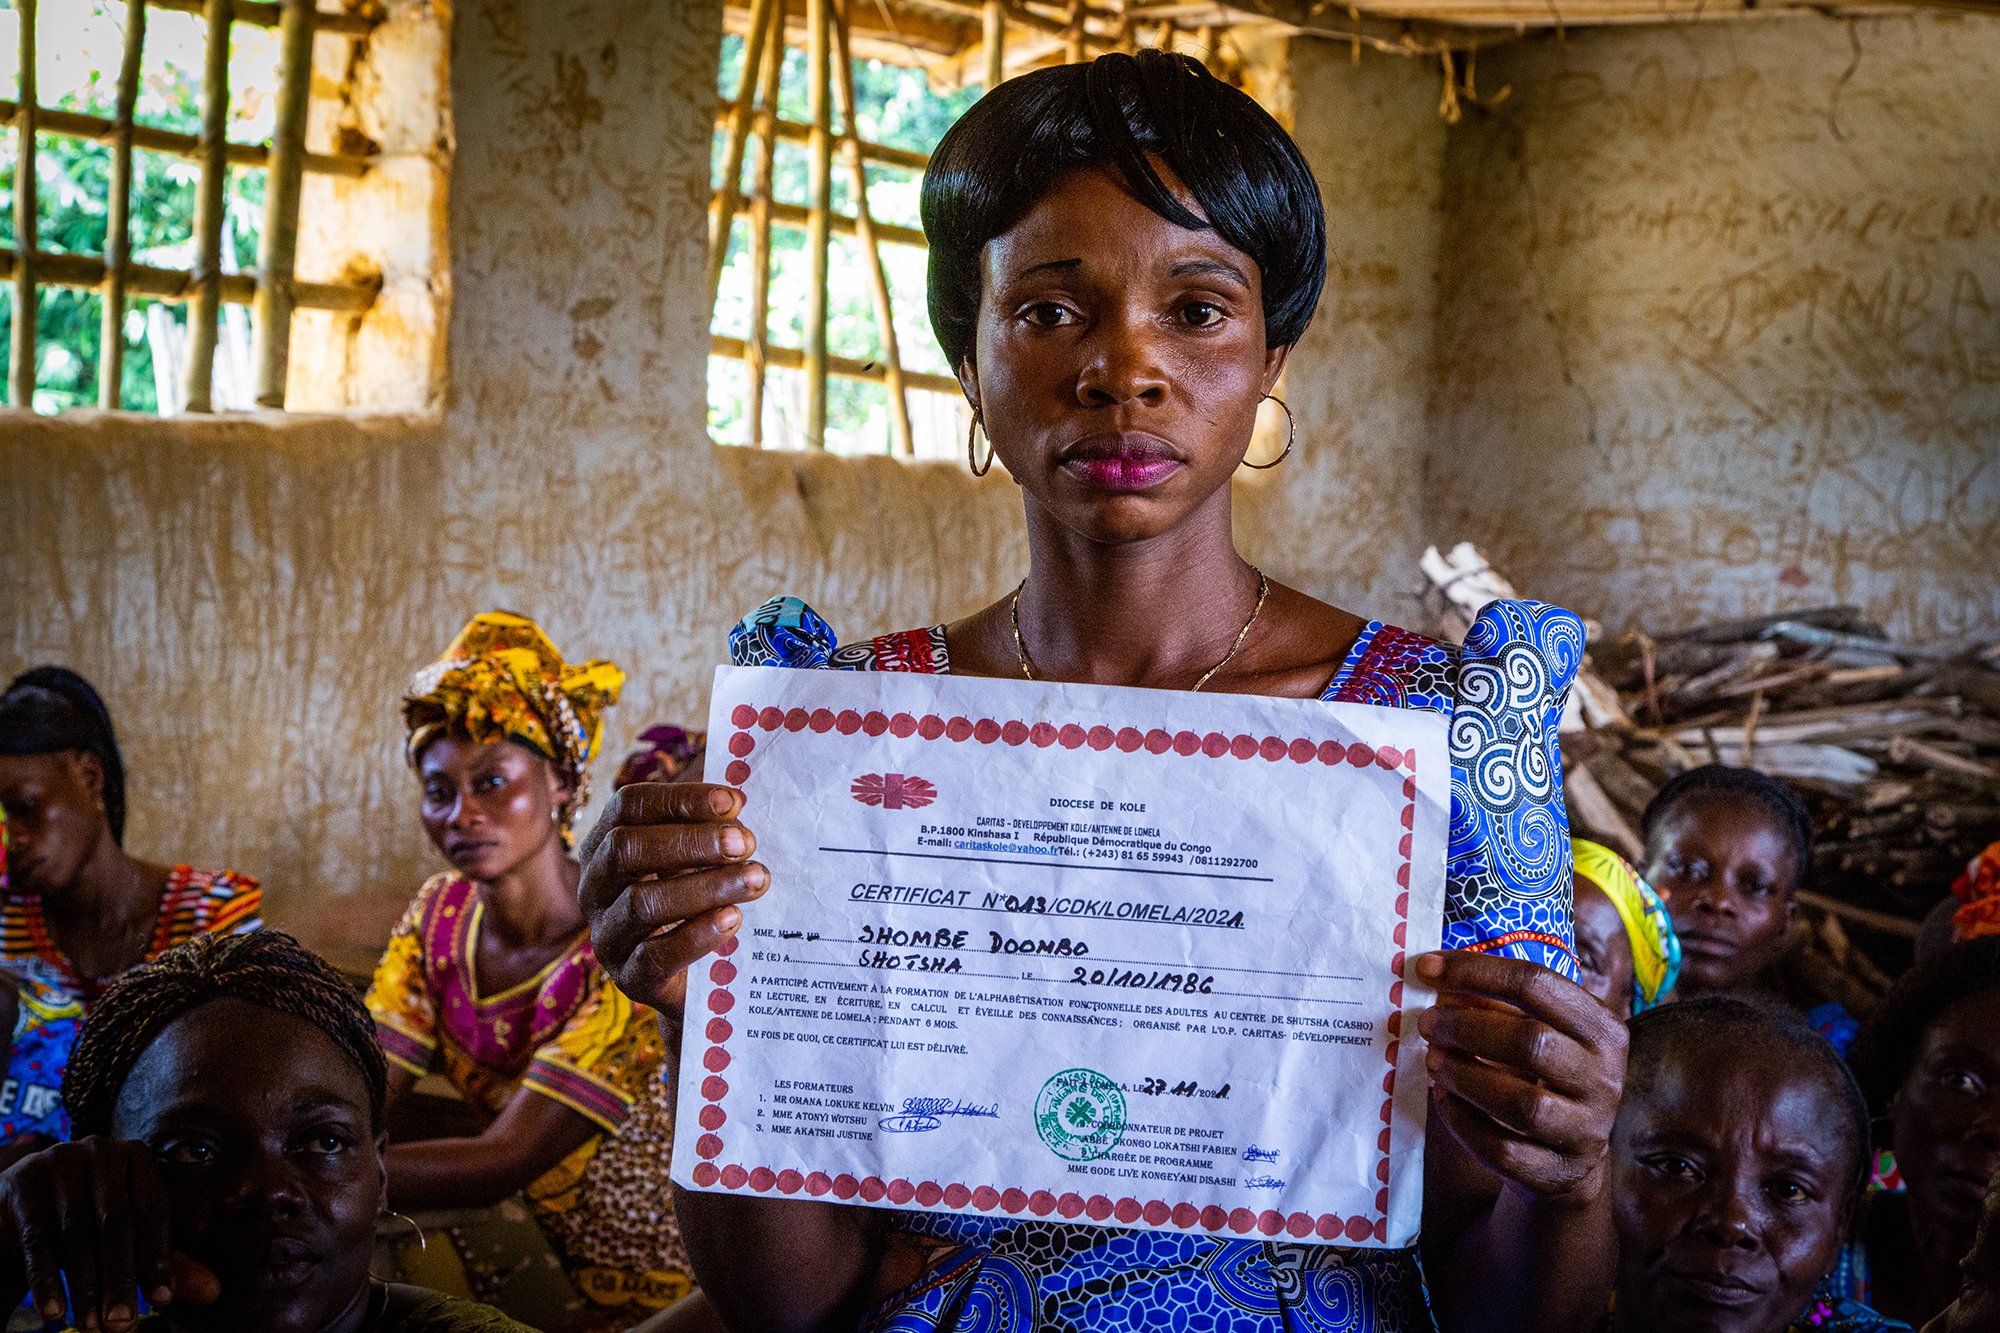 A woman holding a litteracy certificate after completing training program in the Democratic Republic of Congo.